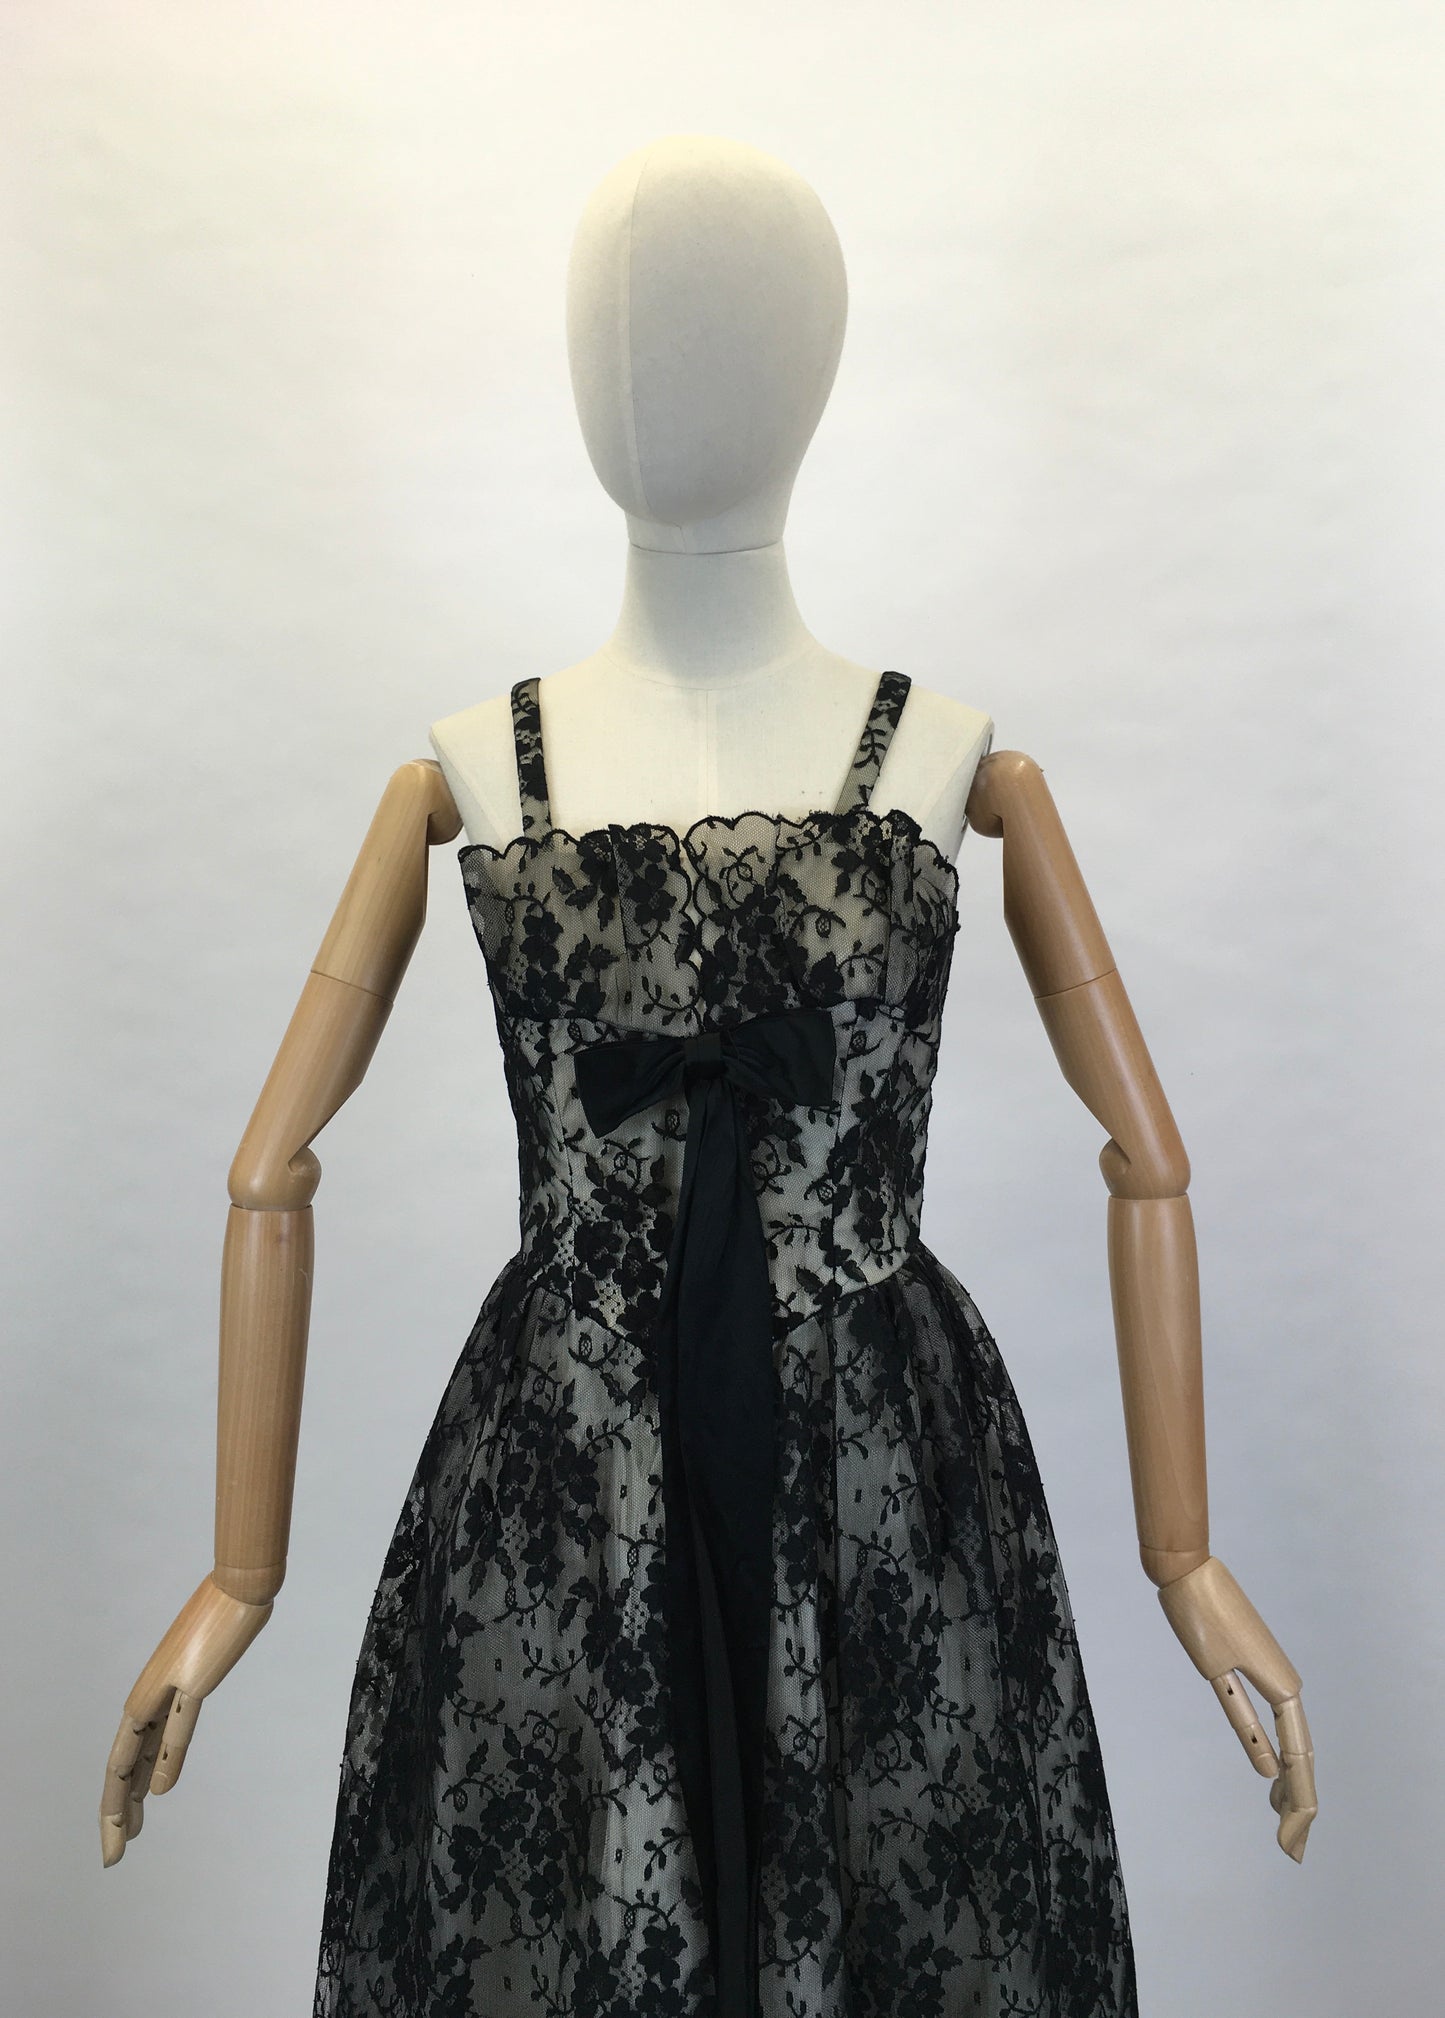 Original 1950’s Little Black Dress - With Lace Overlay and Stunning Details